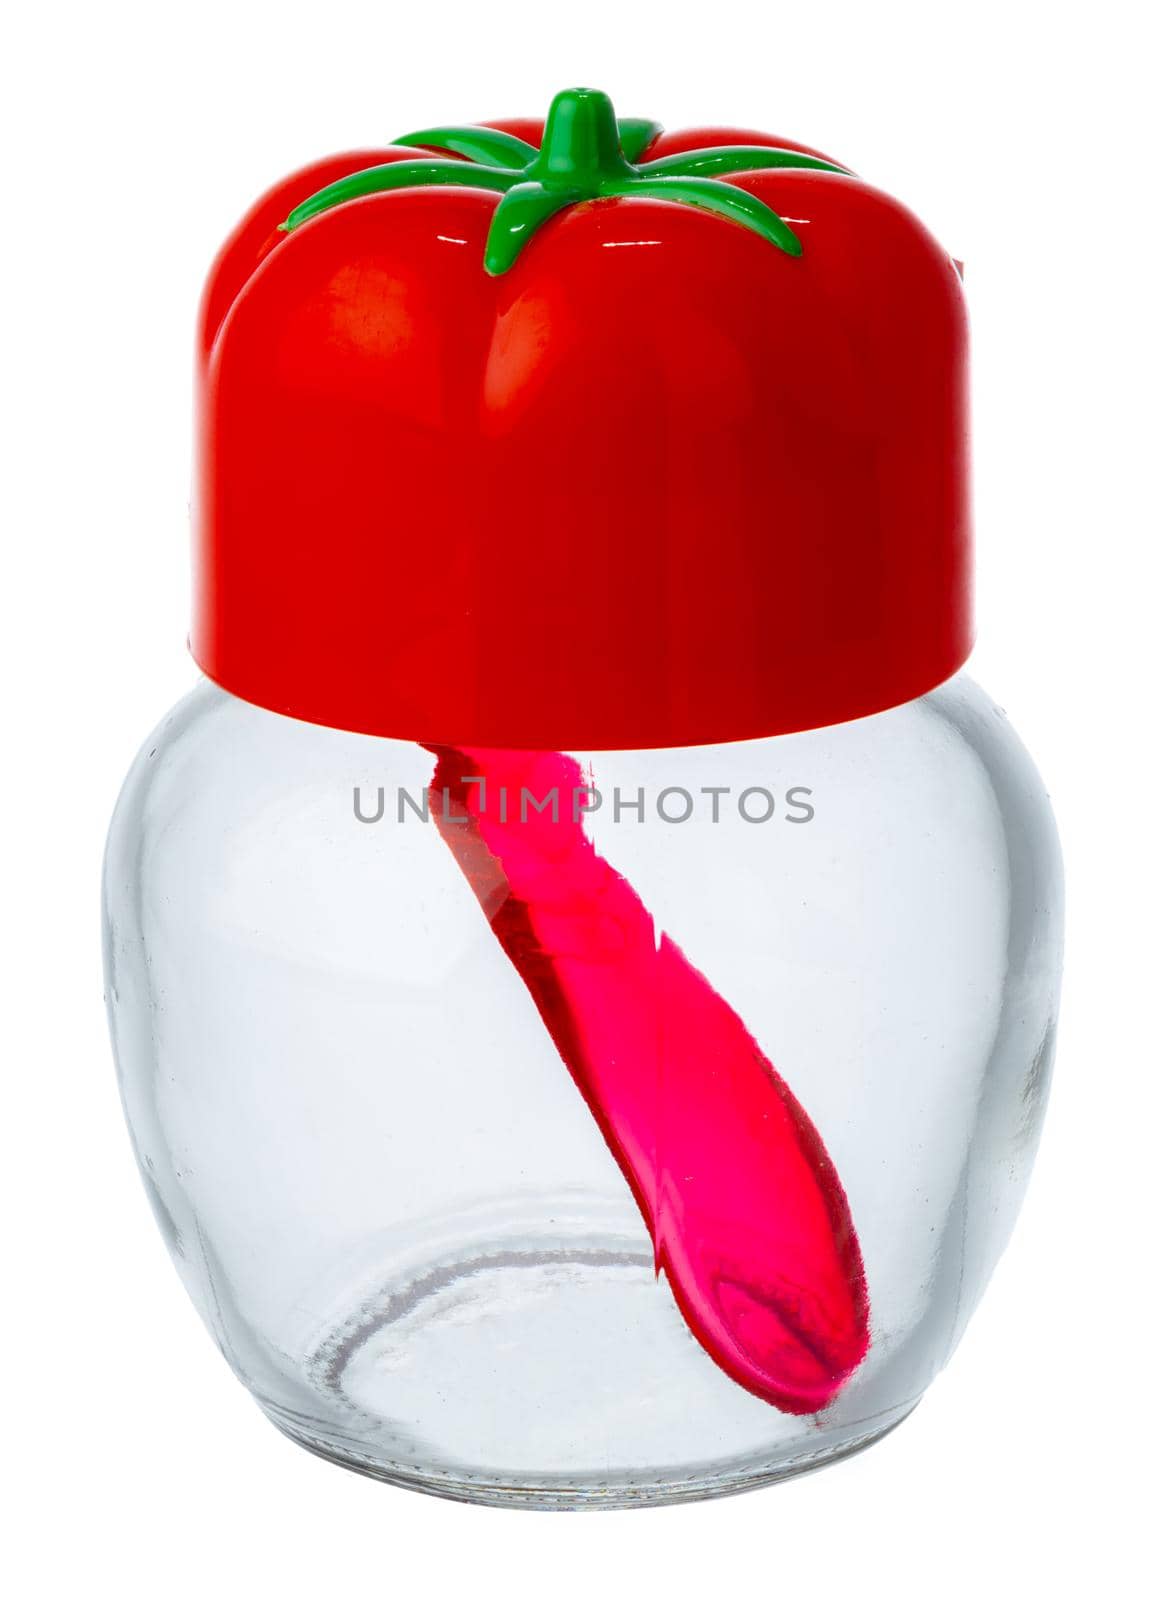 Empty salt shaker with tomato lid isolated on white background